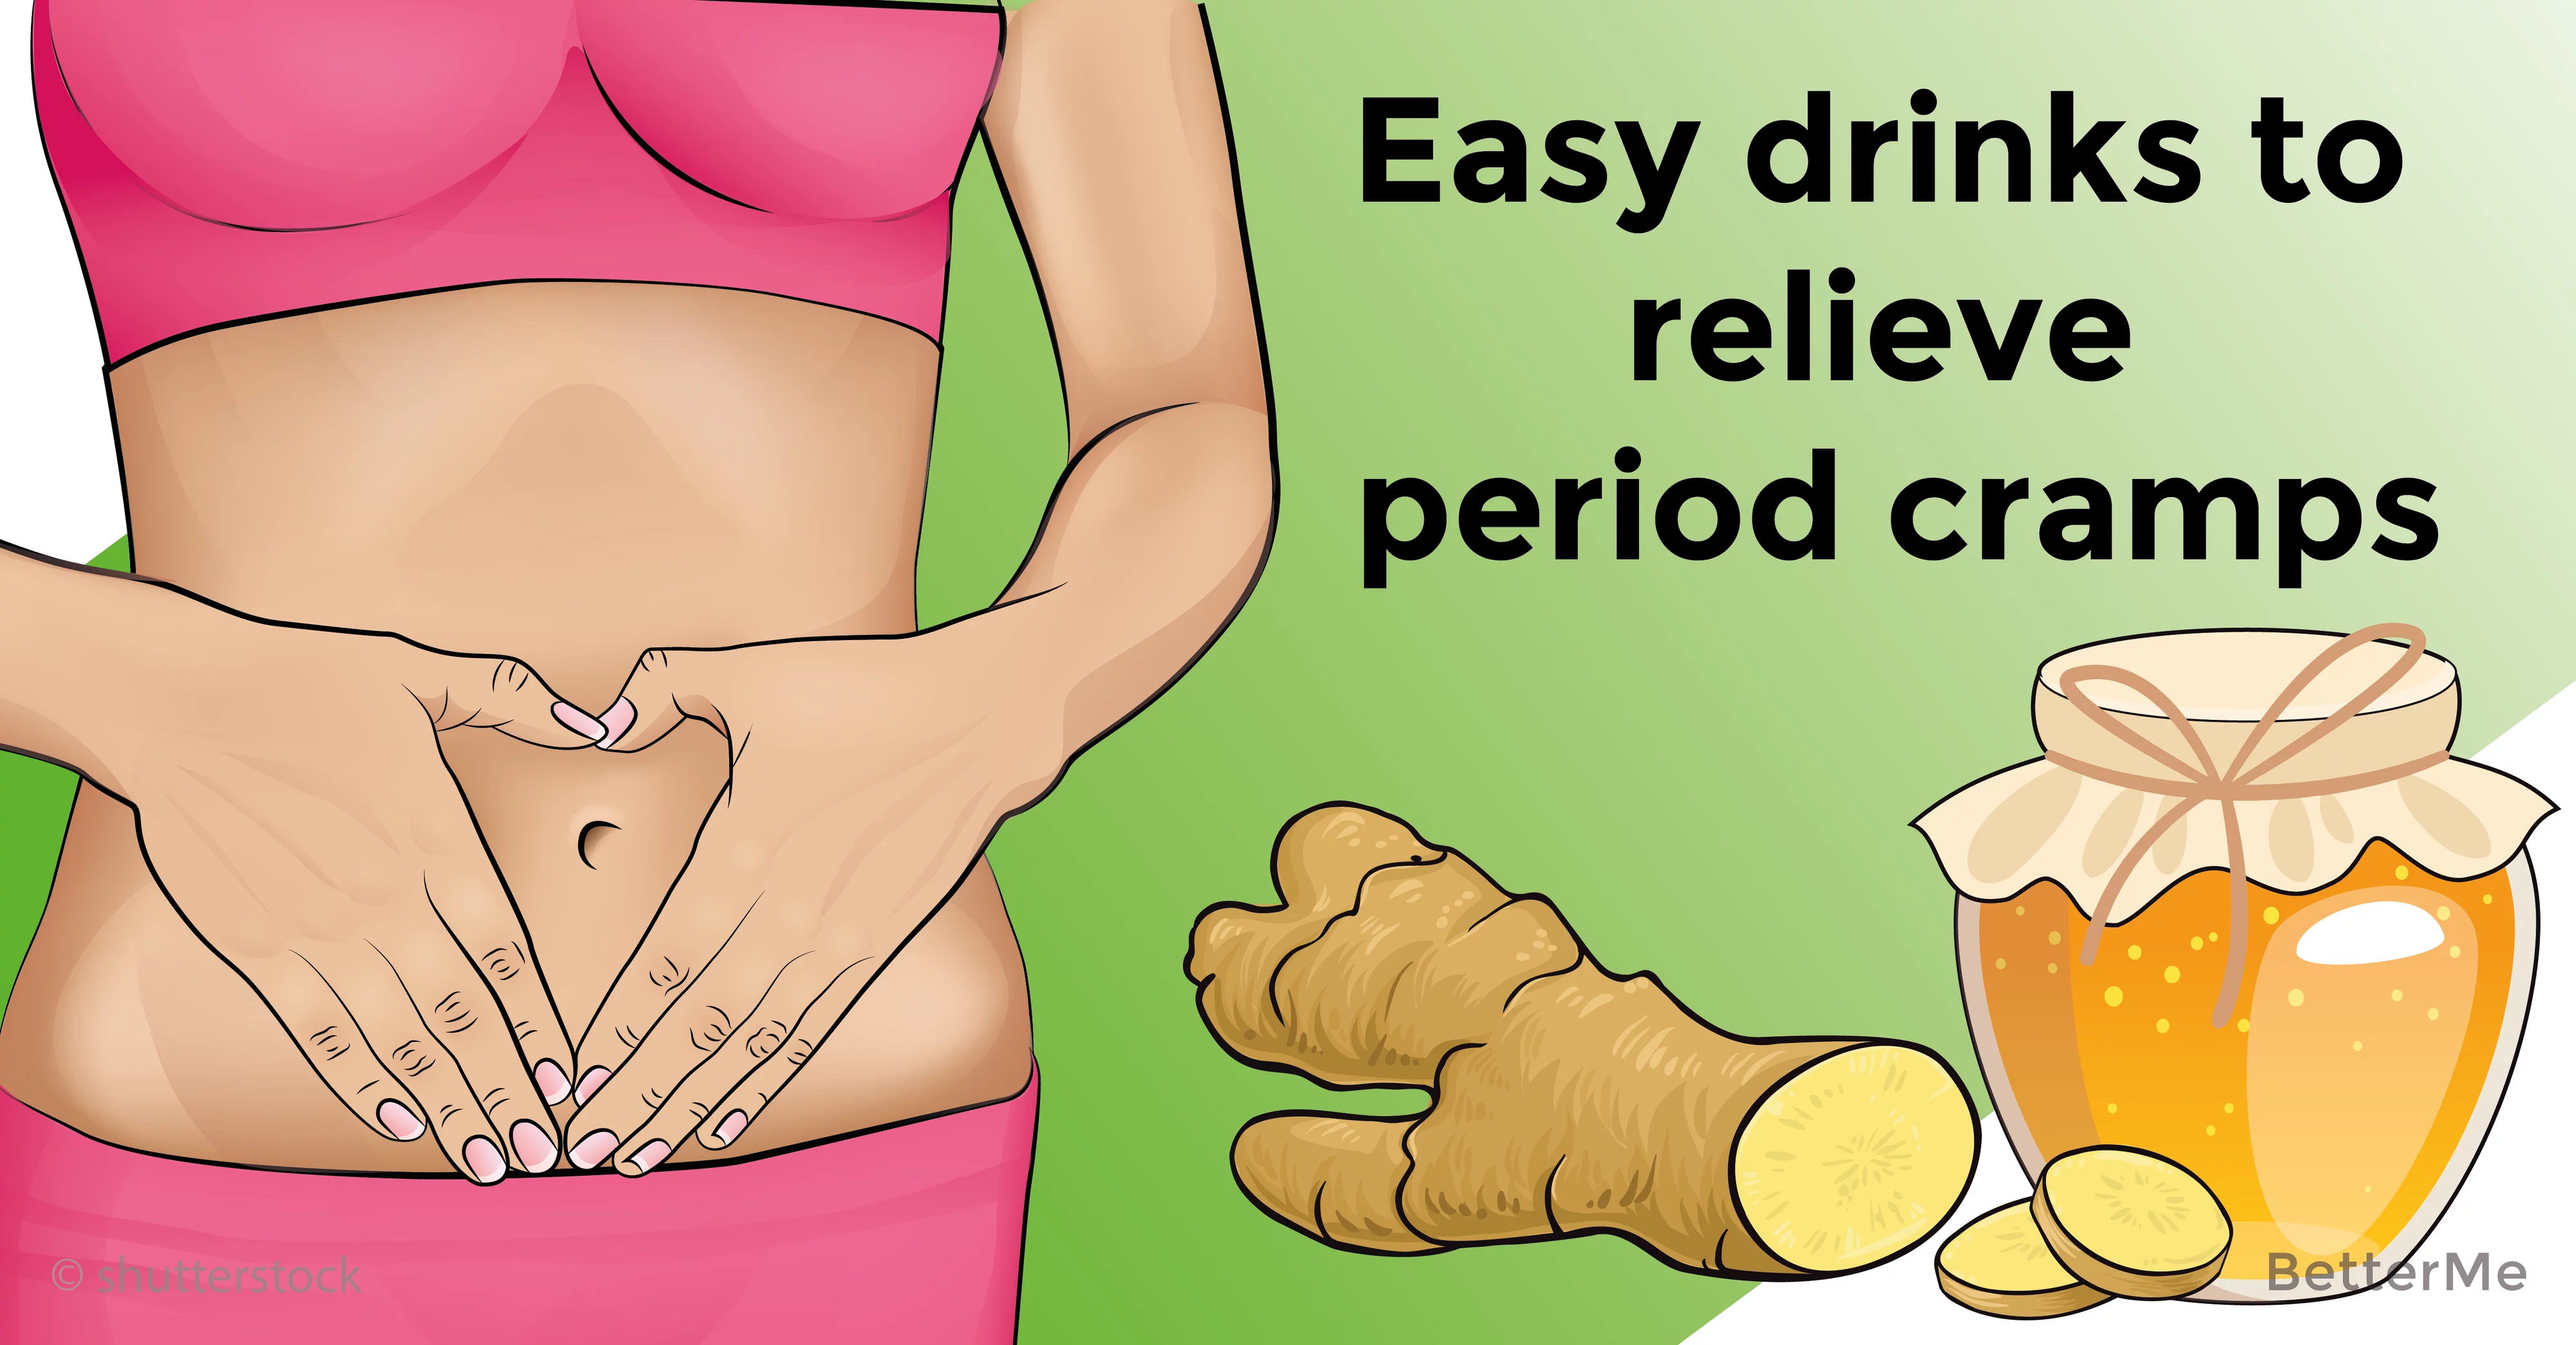 Easy drinks to relieve period cramps